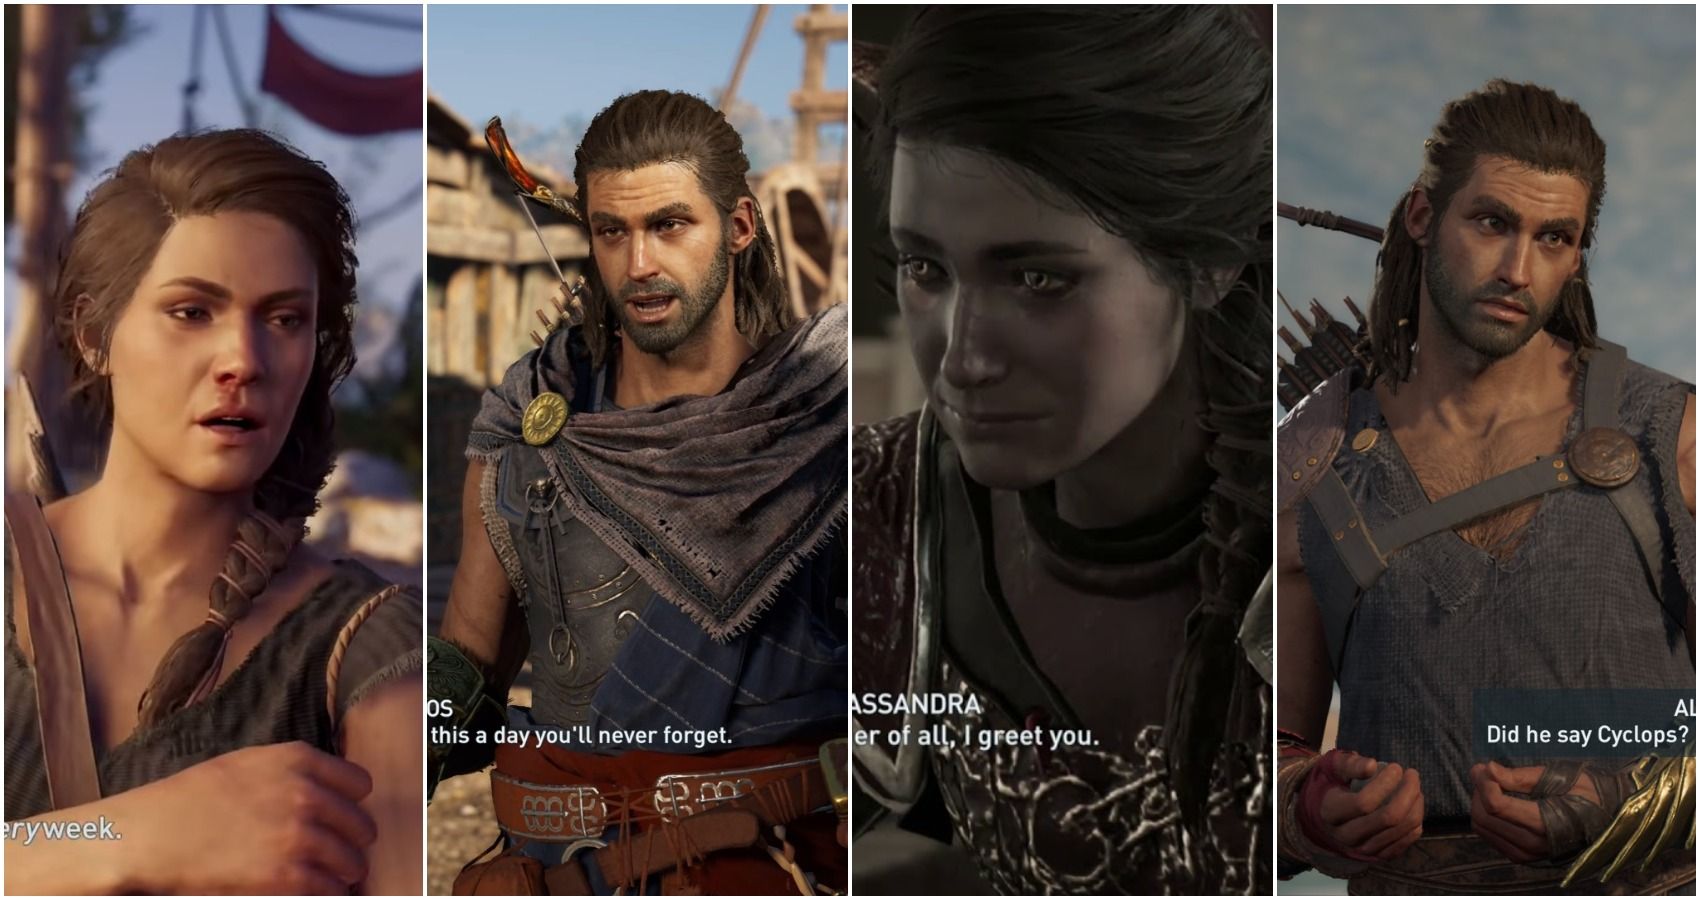 5 Lines In Assassin's Creed Odyssey Kassandra Delivered Best (And Five from  Alexios)